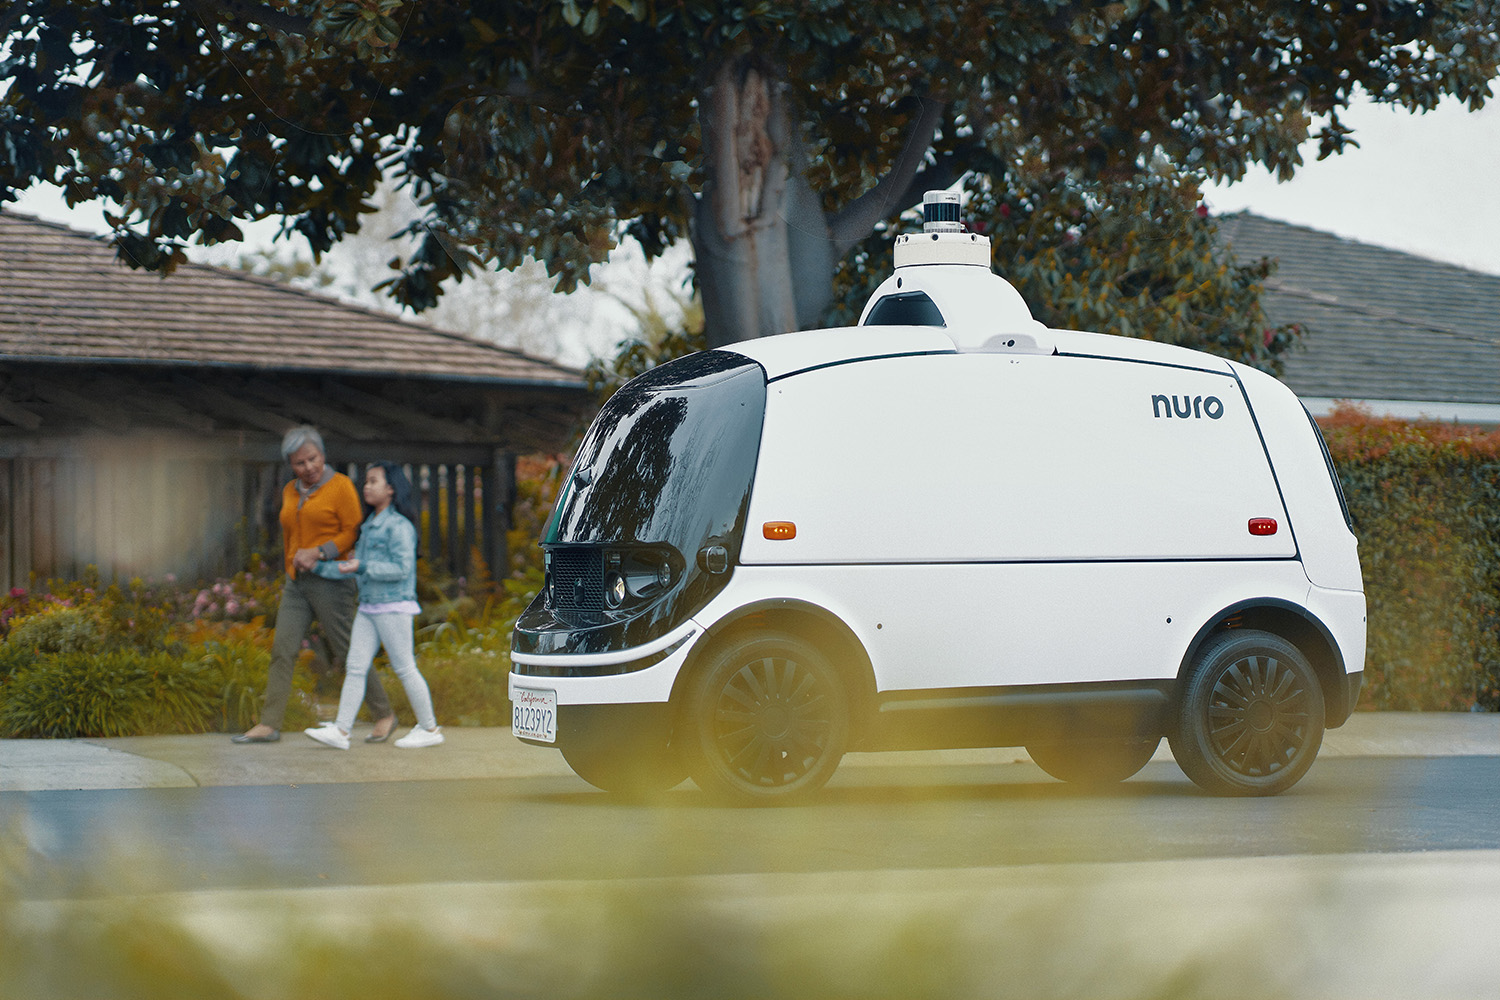 Nuro R2 Self-driving autonomous delivery vehicle on the road in California